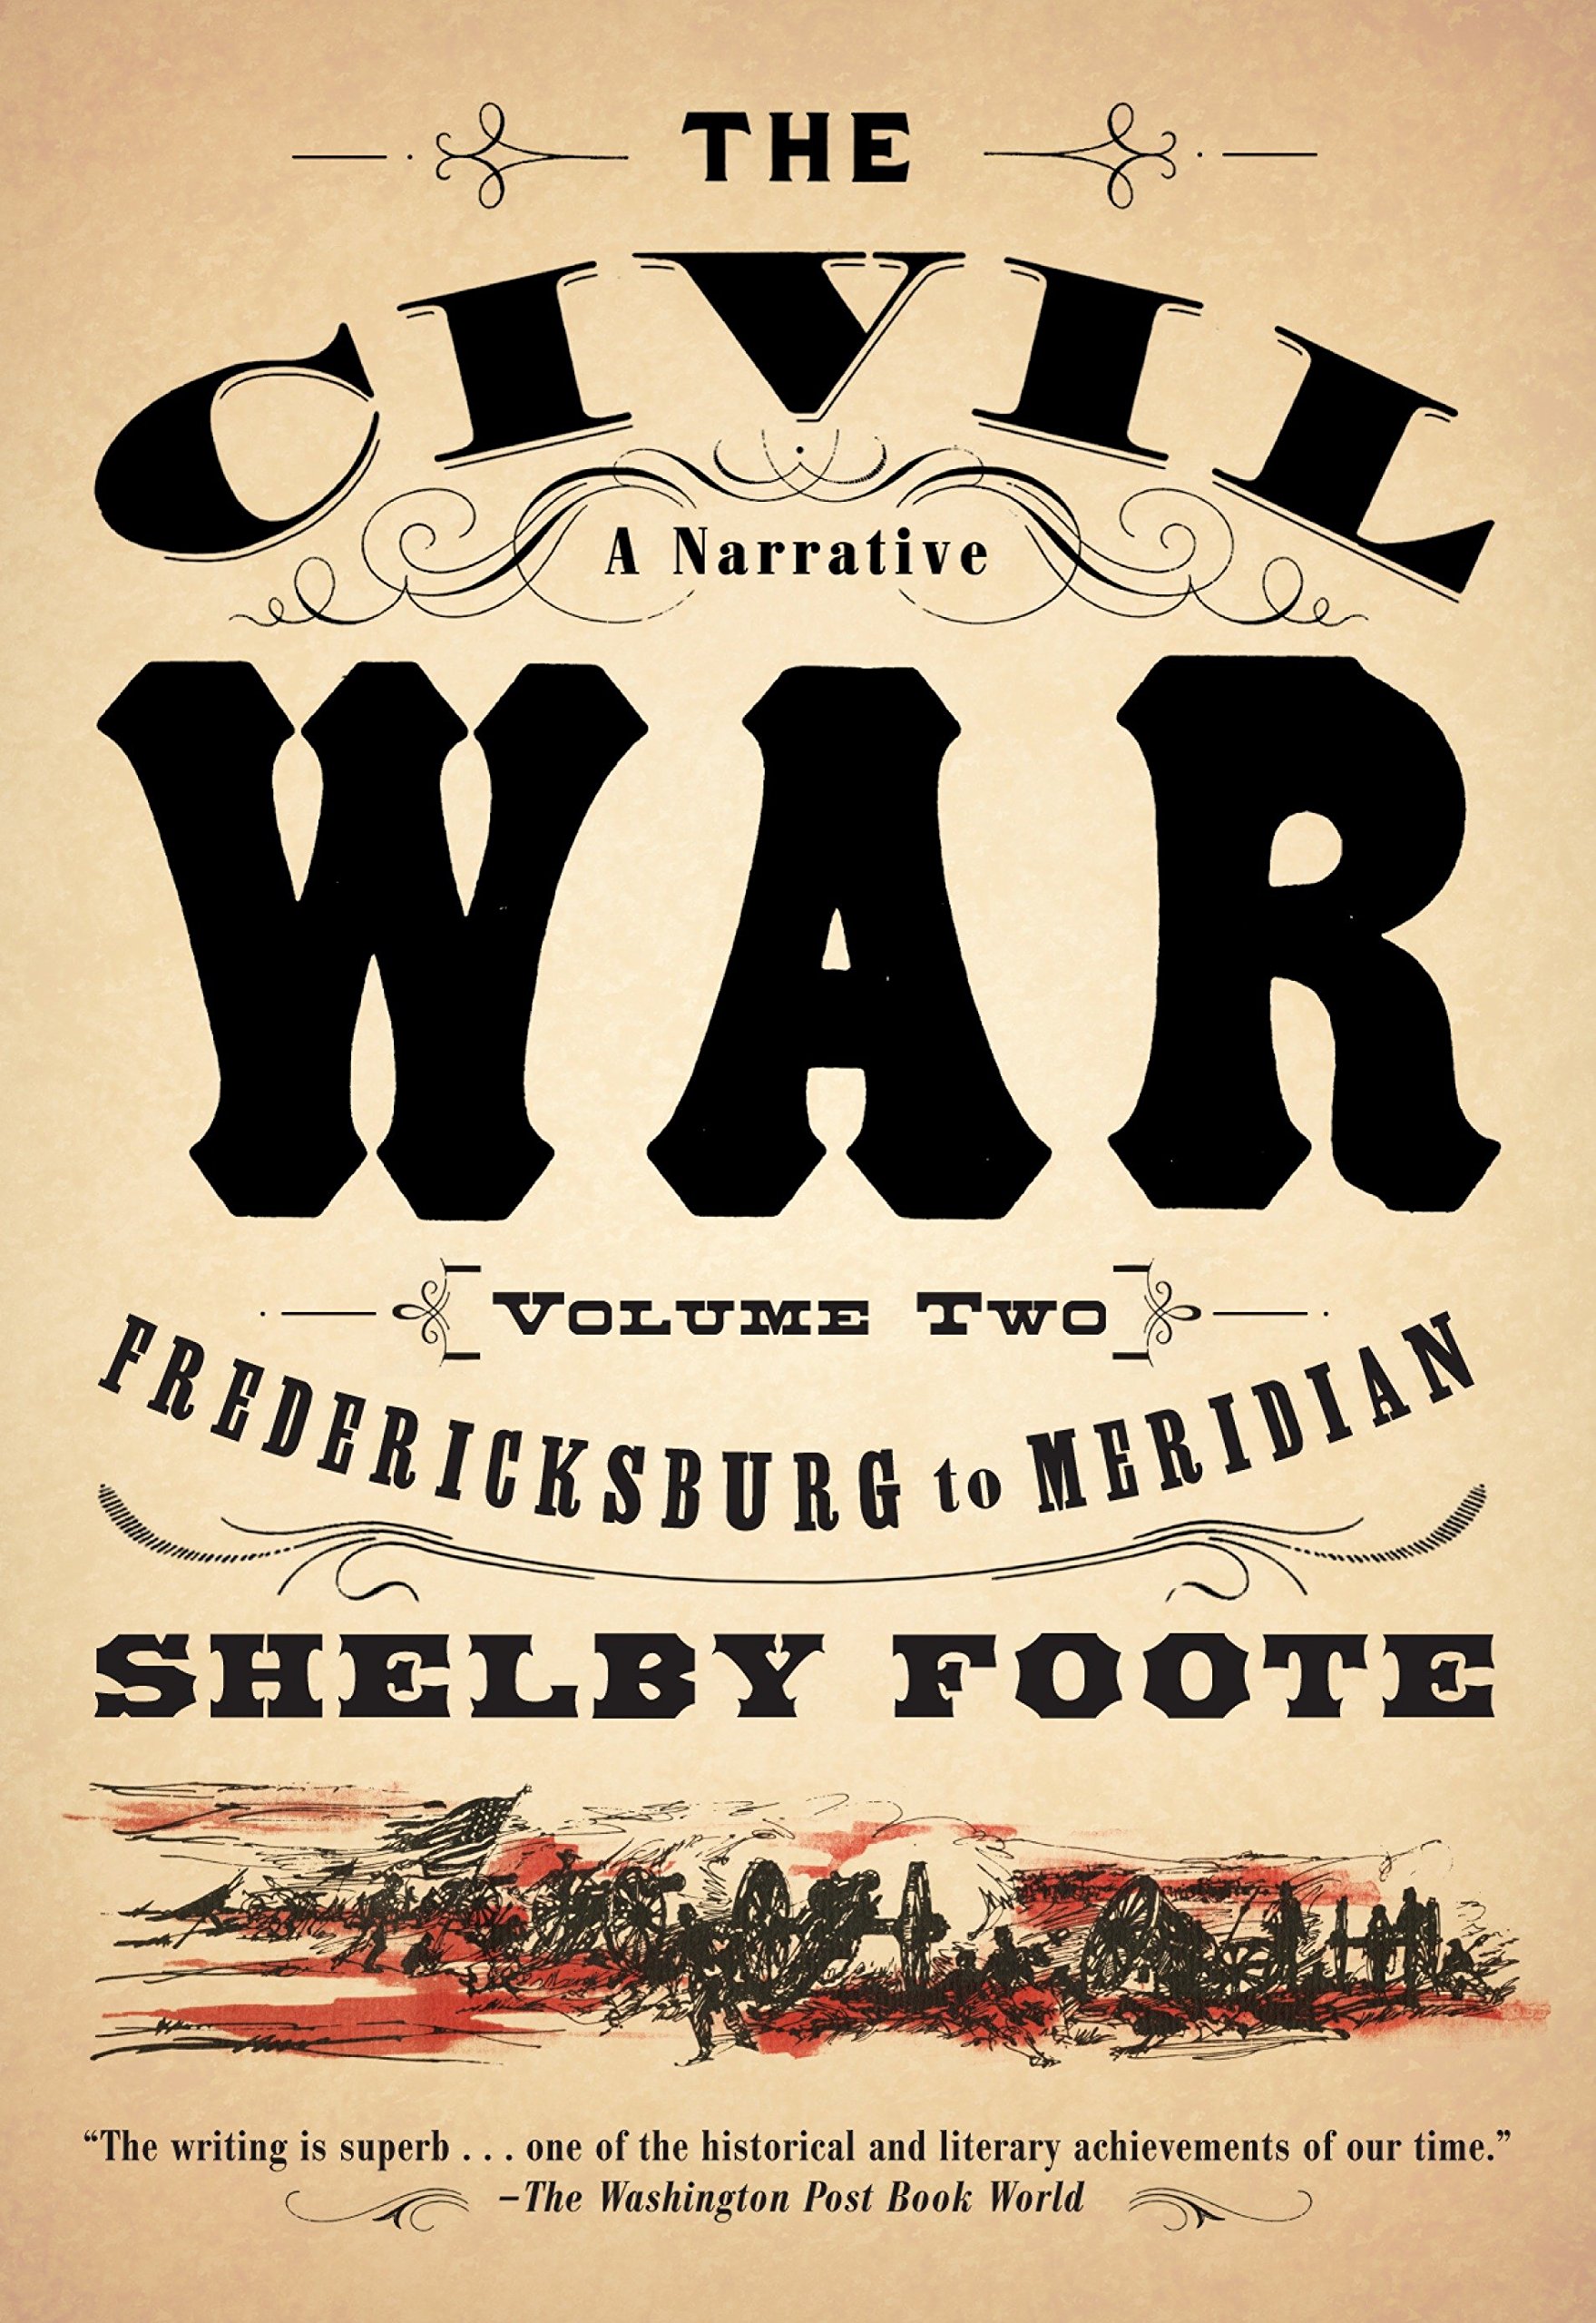 The Civil War: A Narrative, Fredericksburg to Meridian, Library Edition